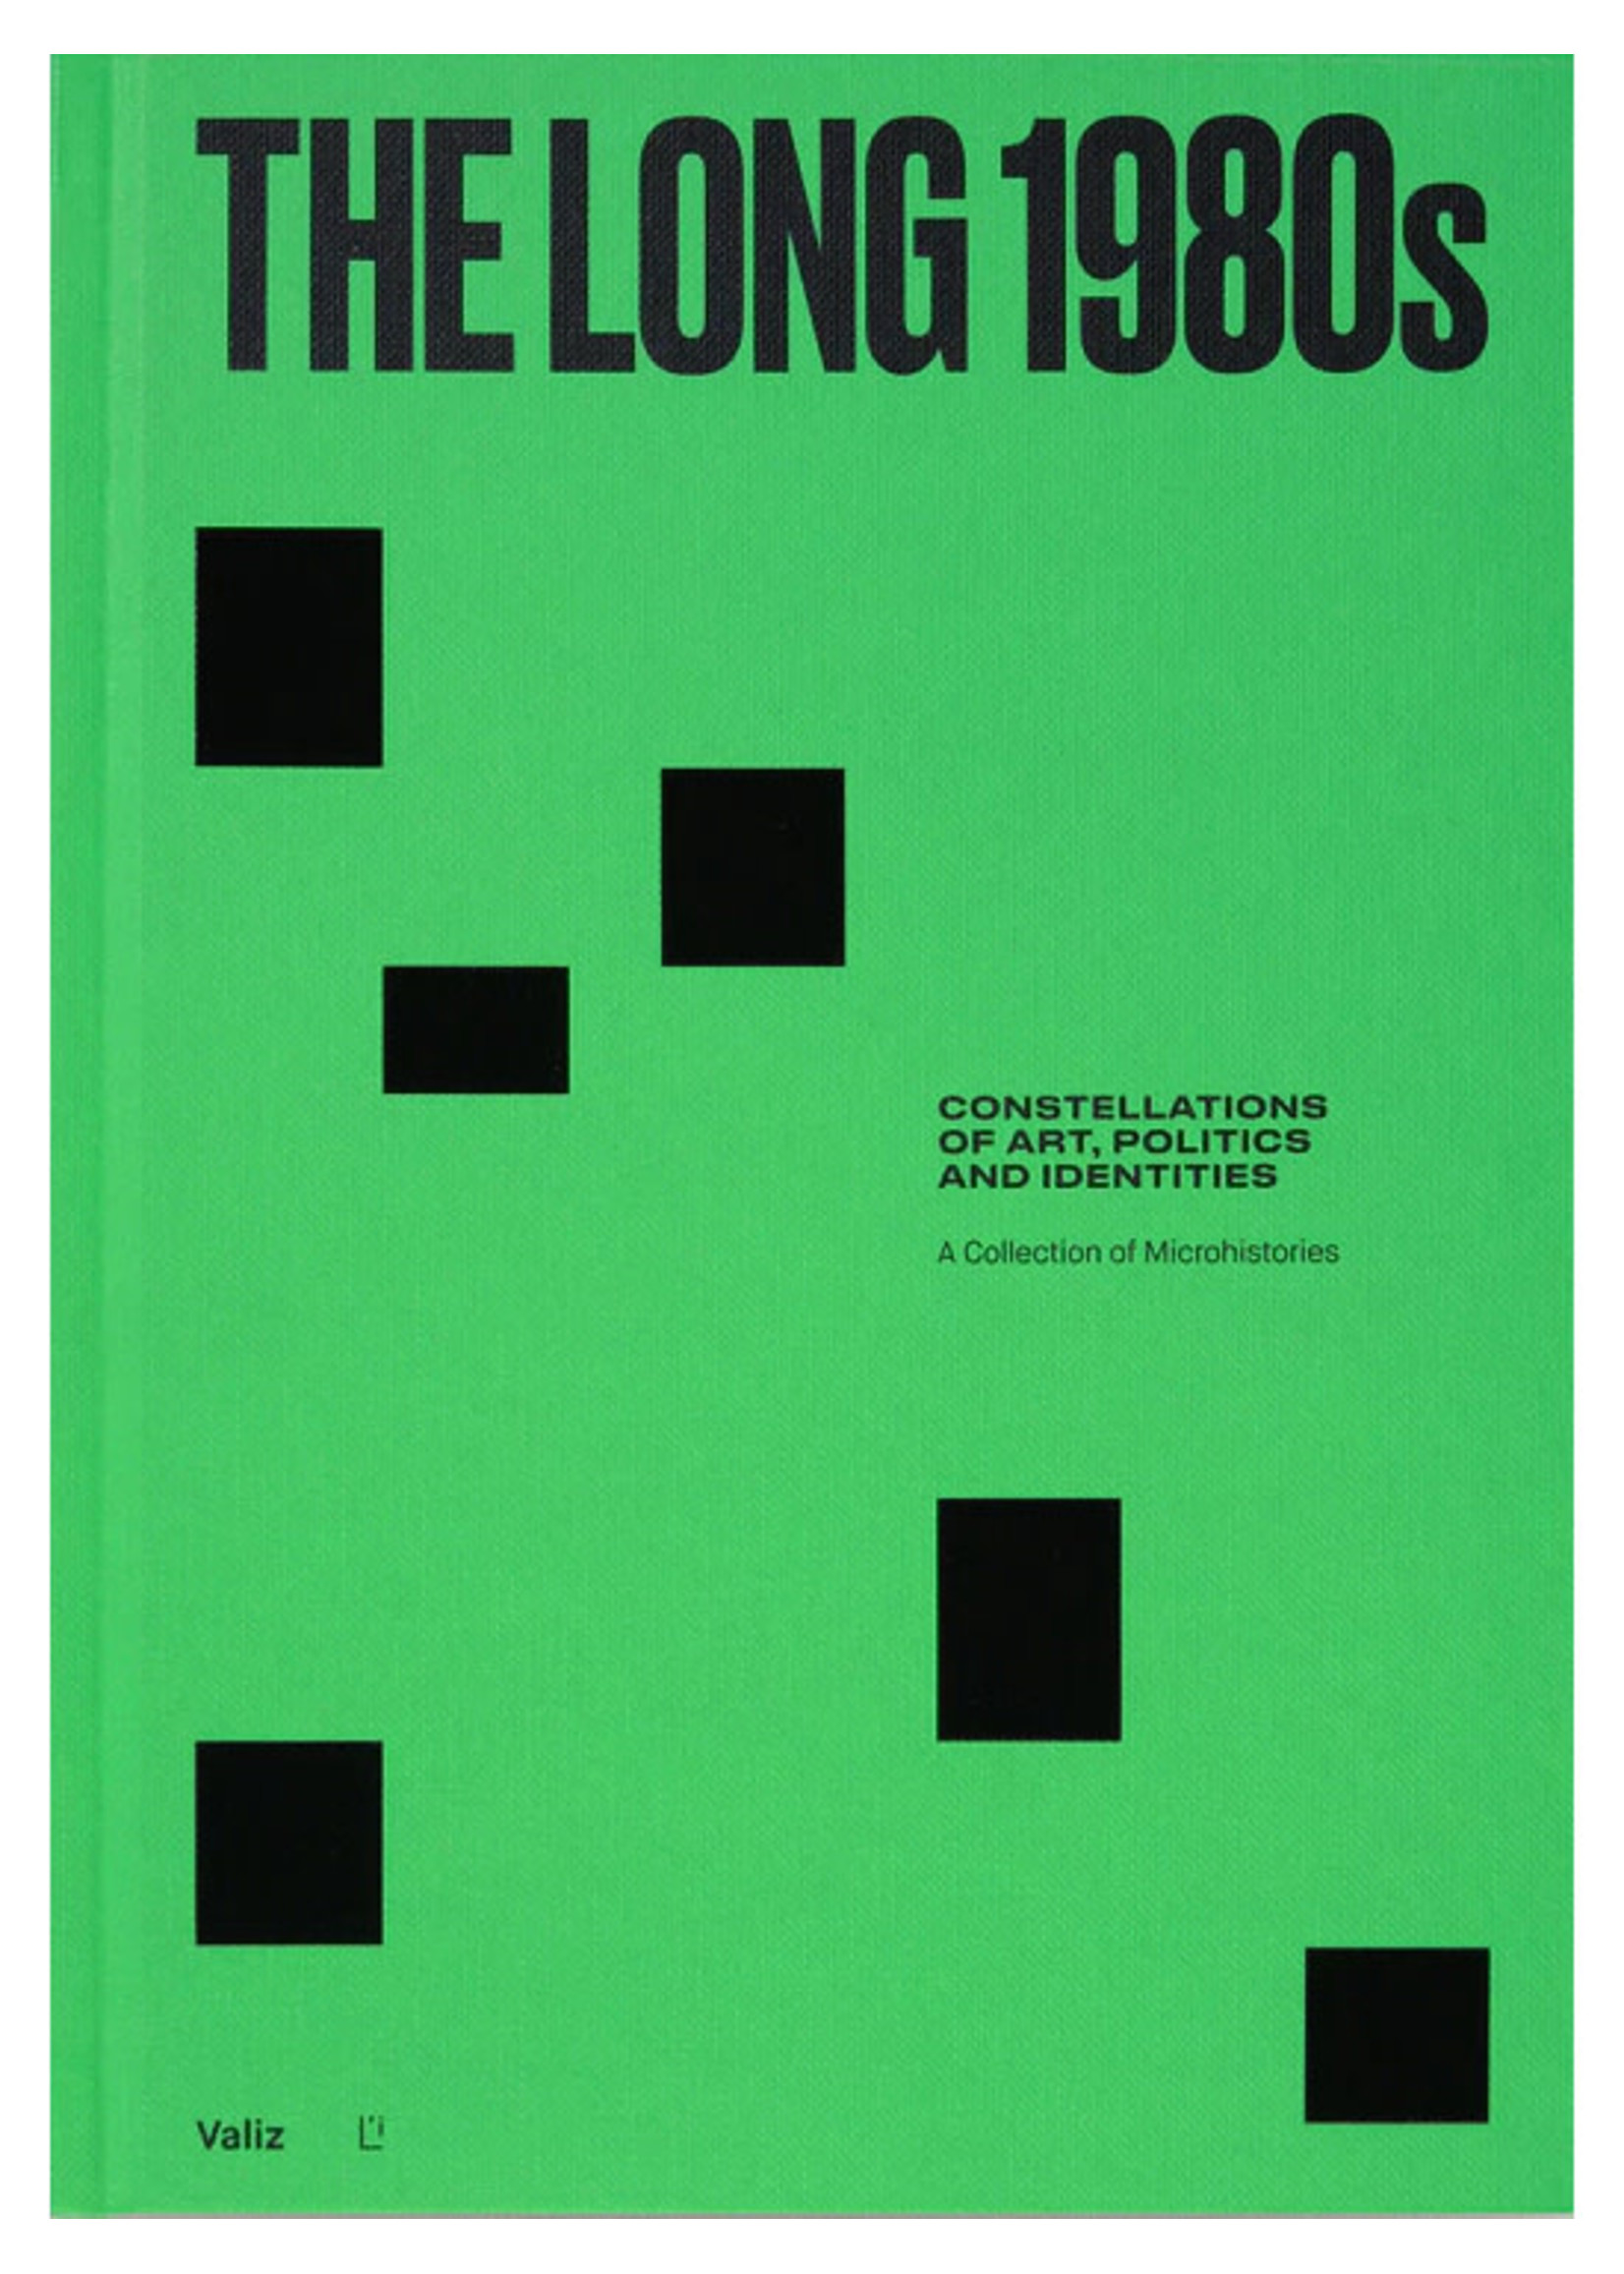 Valiz The Long 1980s: Constellations of Art, Politics and Identities: a Collection of Microhistories